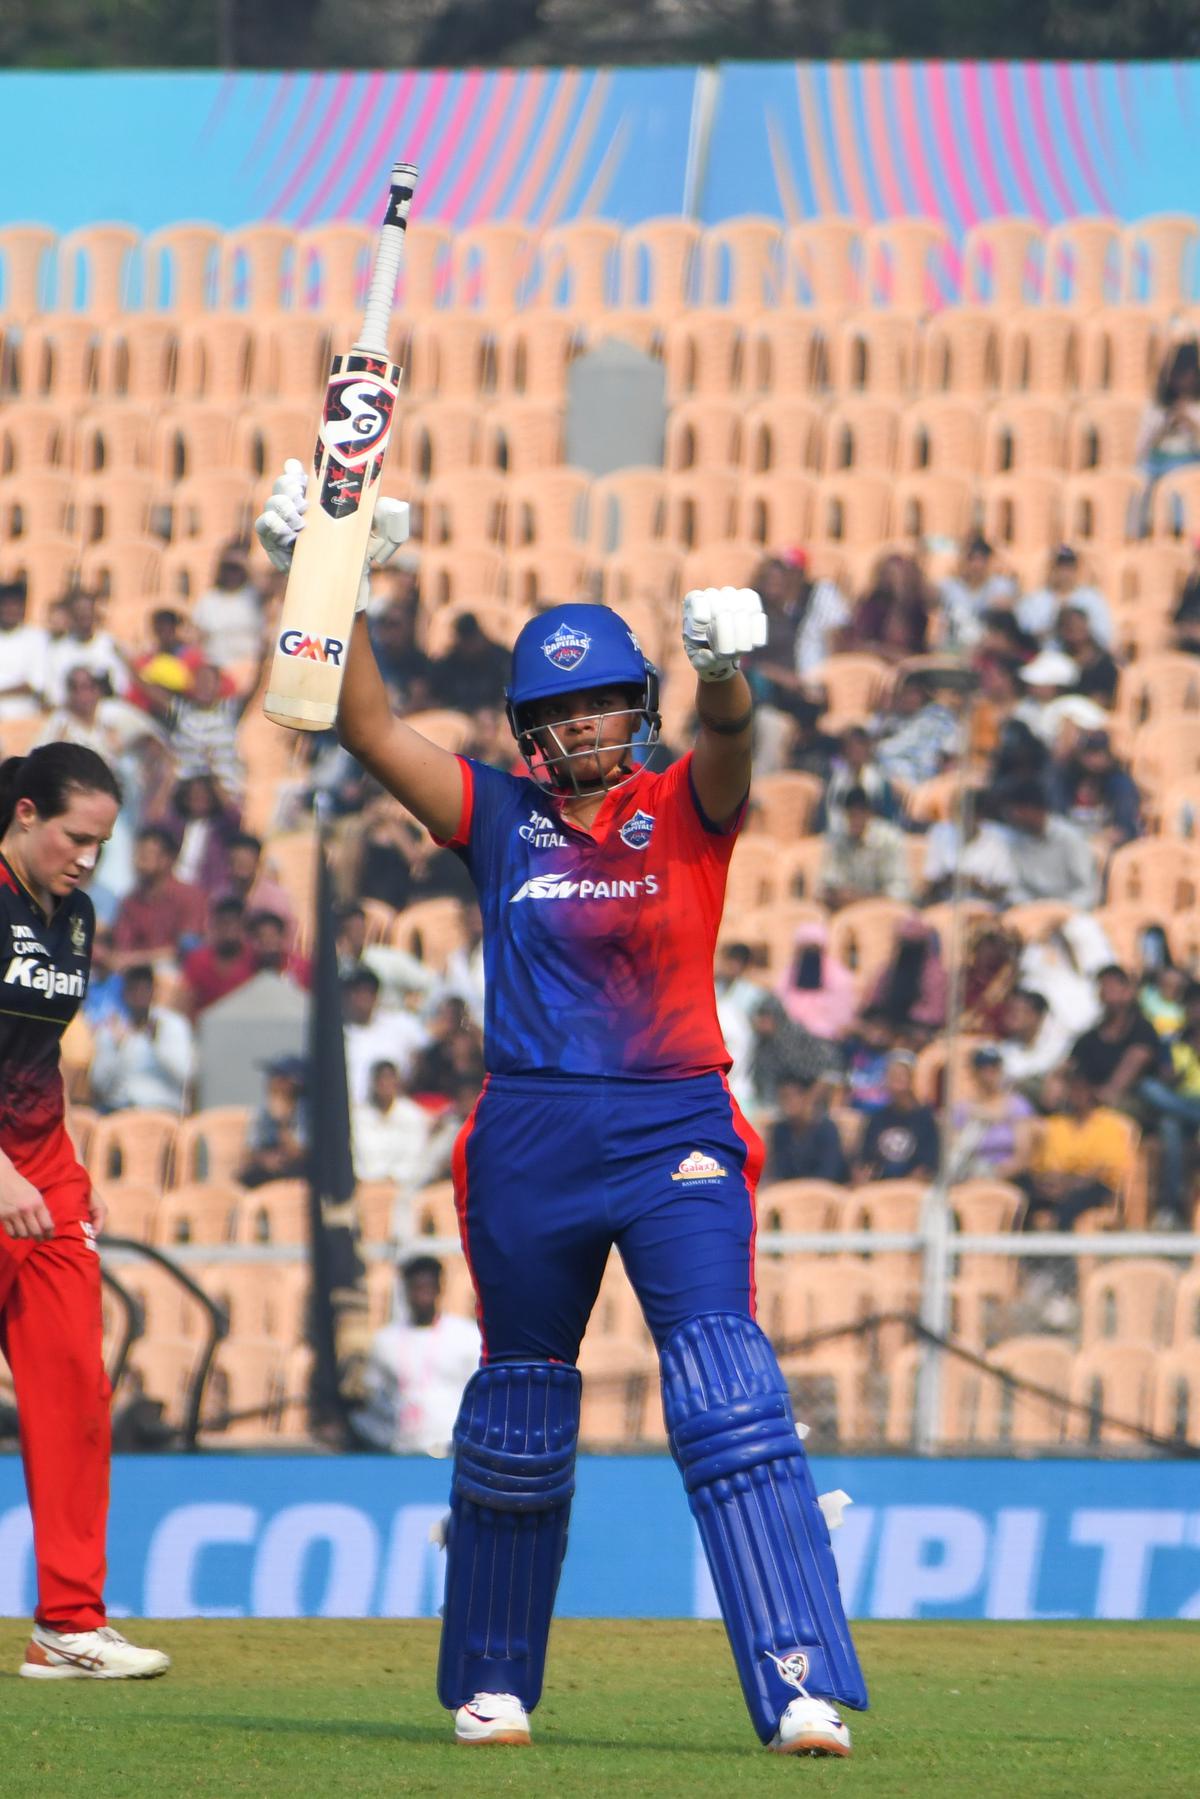 Shafali Verma celebrates scoring her half century during the WPL match between Delhi Capitals and Royal Challengers Bangalore at Brabourne Stadium in Mumbai on Sunday, March 5, 2023.